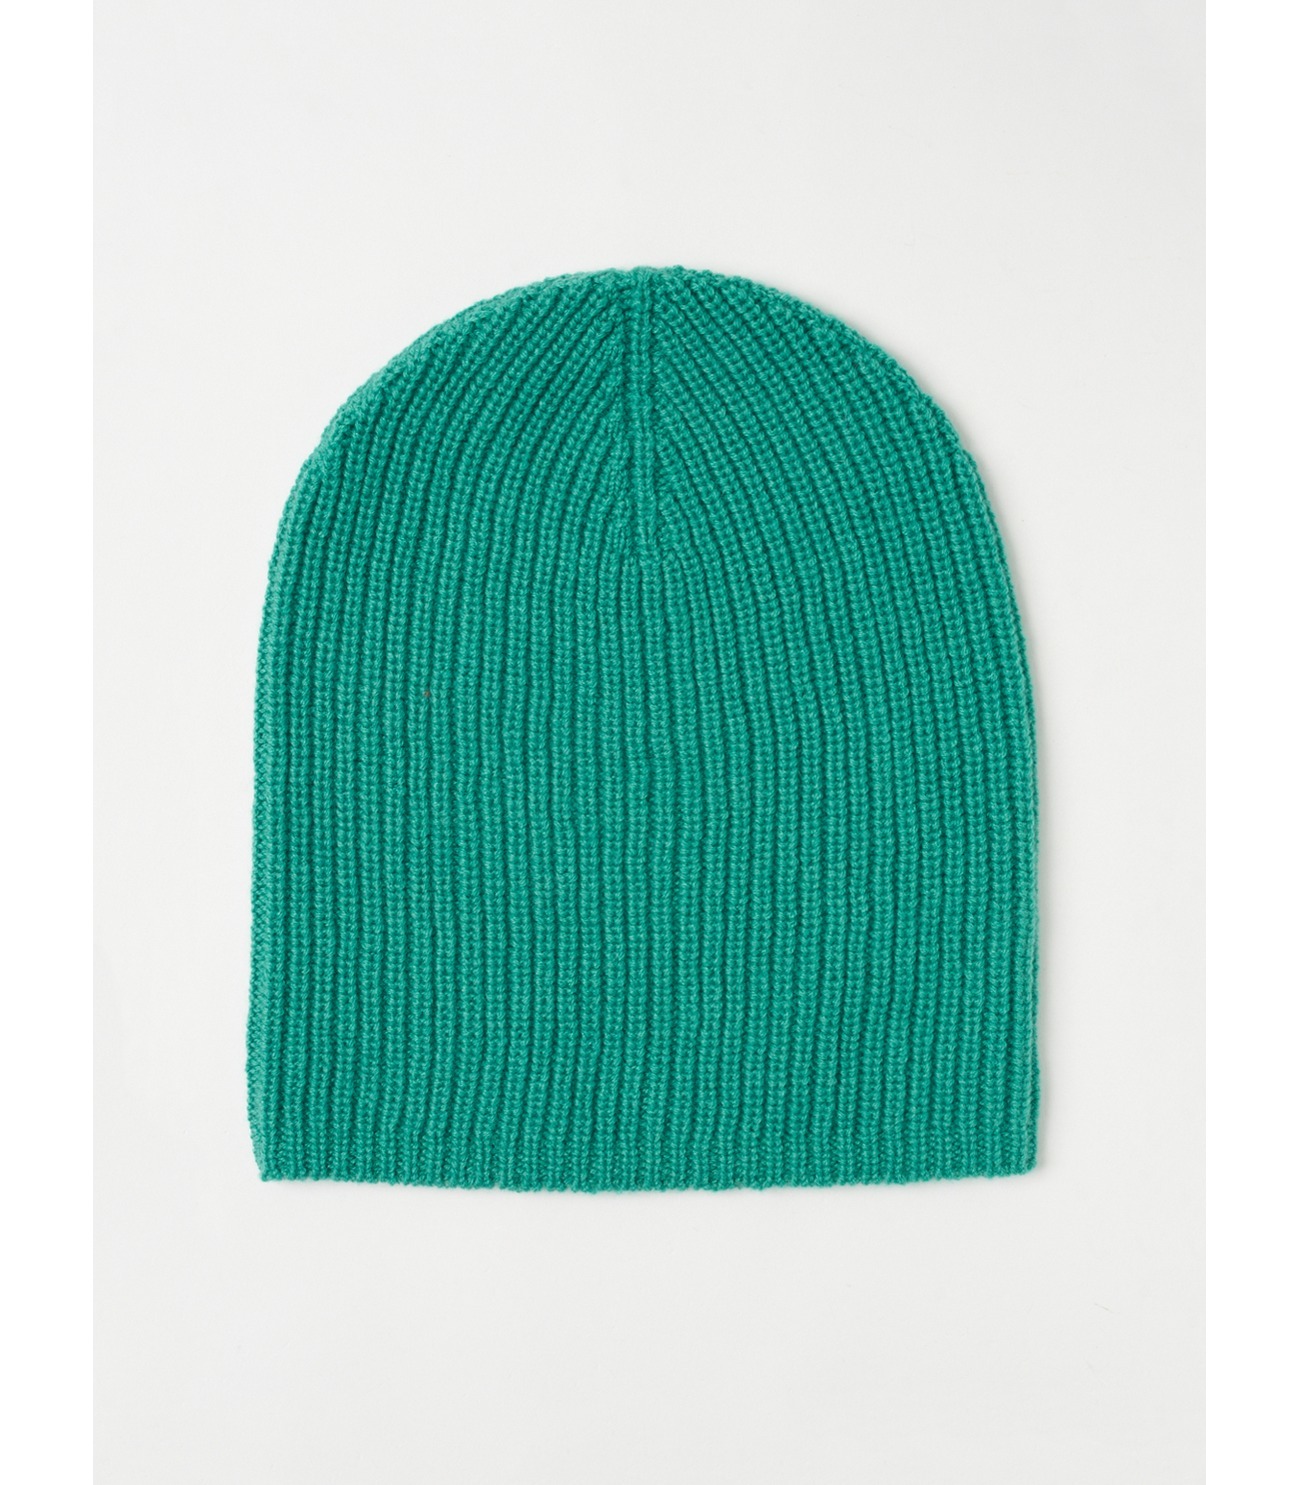 Holiday cashmere cap 詳細画像 green 2